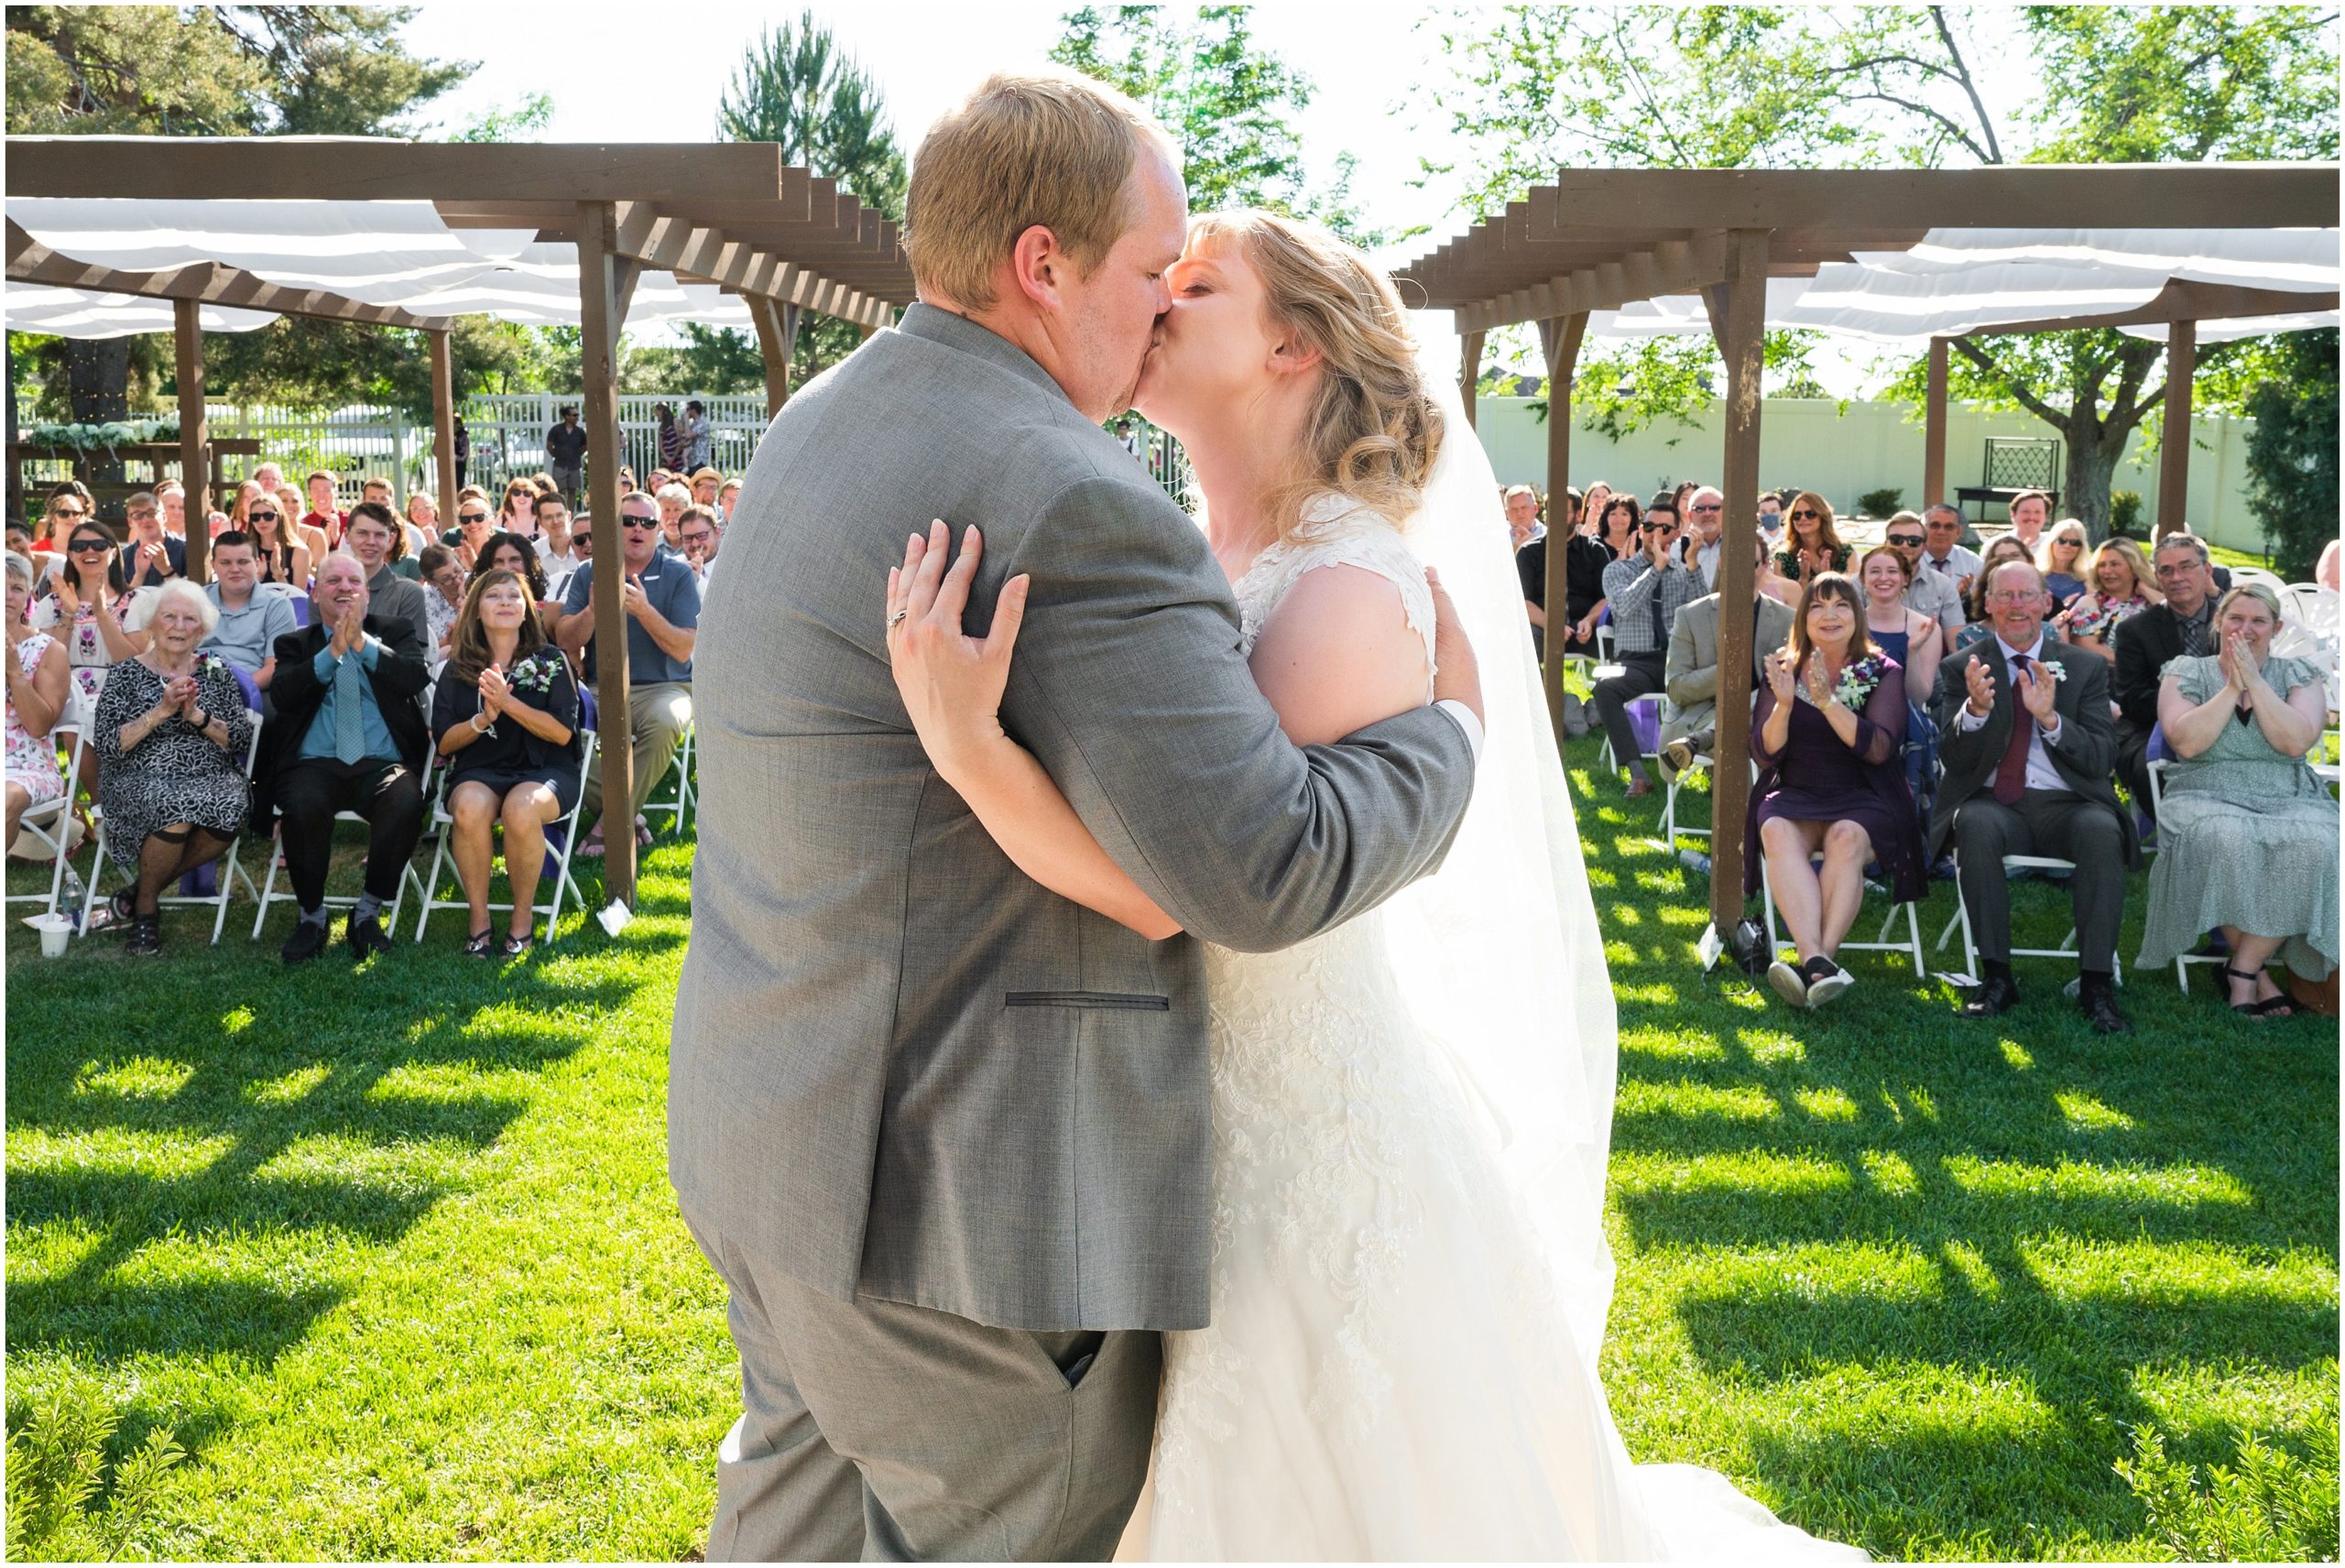 Bride and Groom during ceremony with mountain views | Orchid Inspired Summer Wedding at Oak Hills Utah | Jessie and Dallin Photography